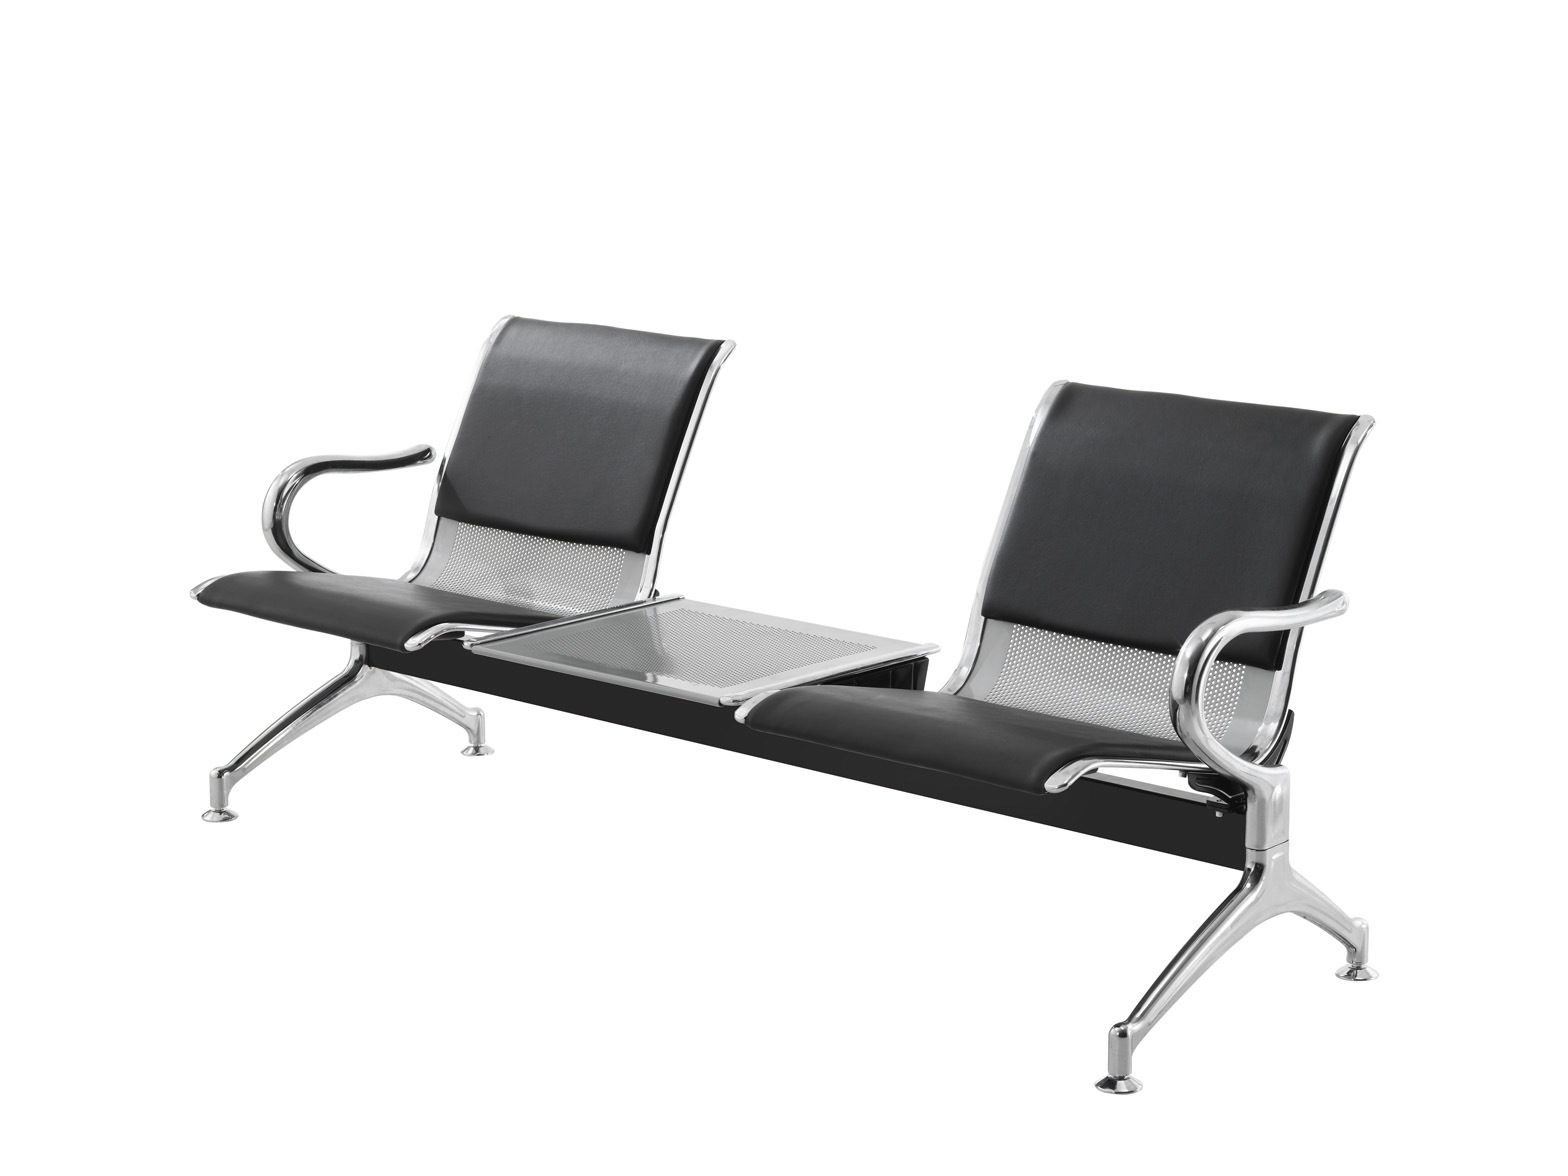 Airport Seating with Teapoy (JM-7203A)